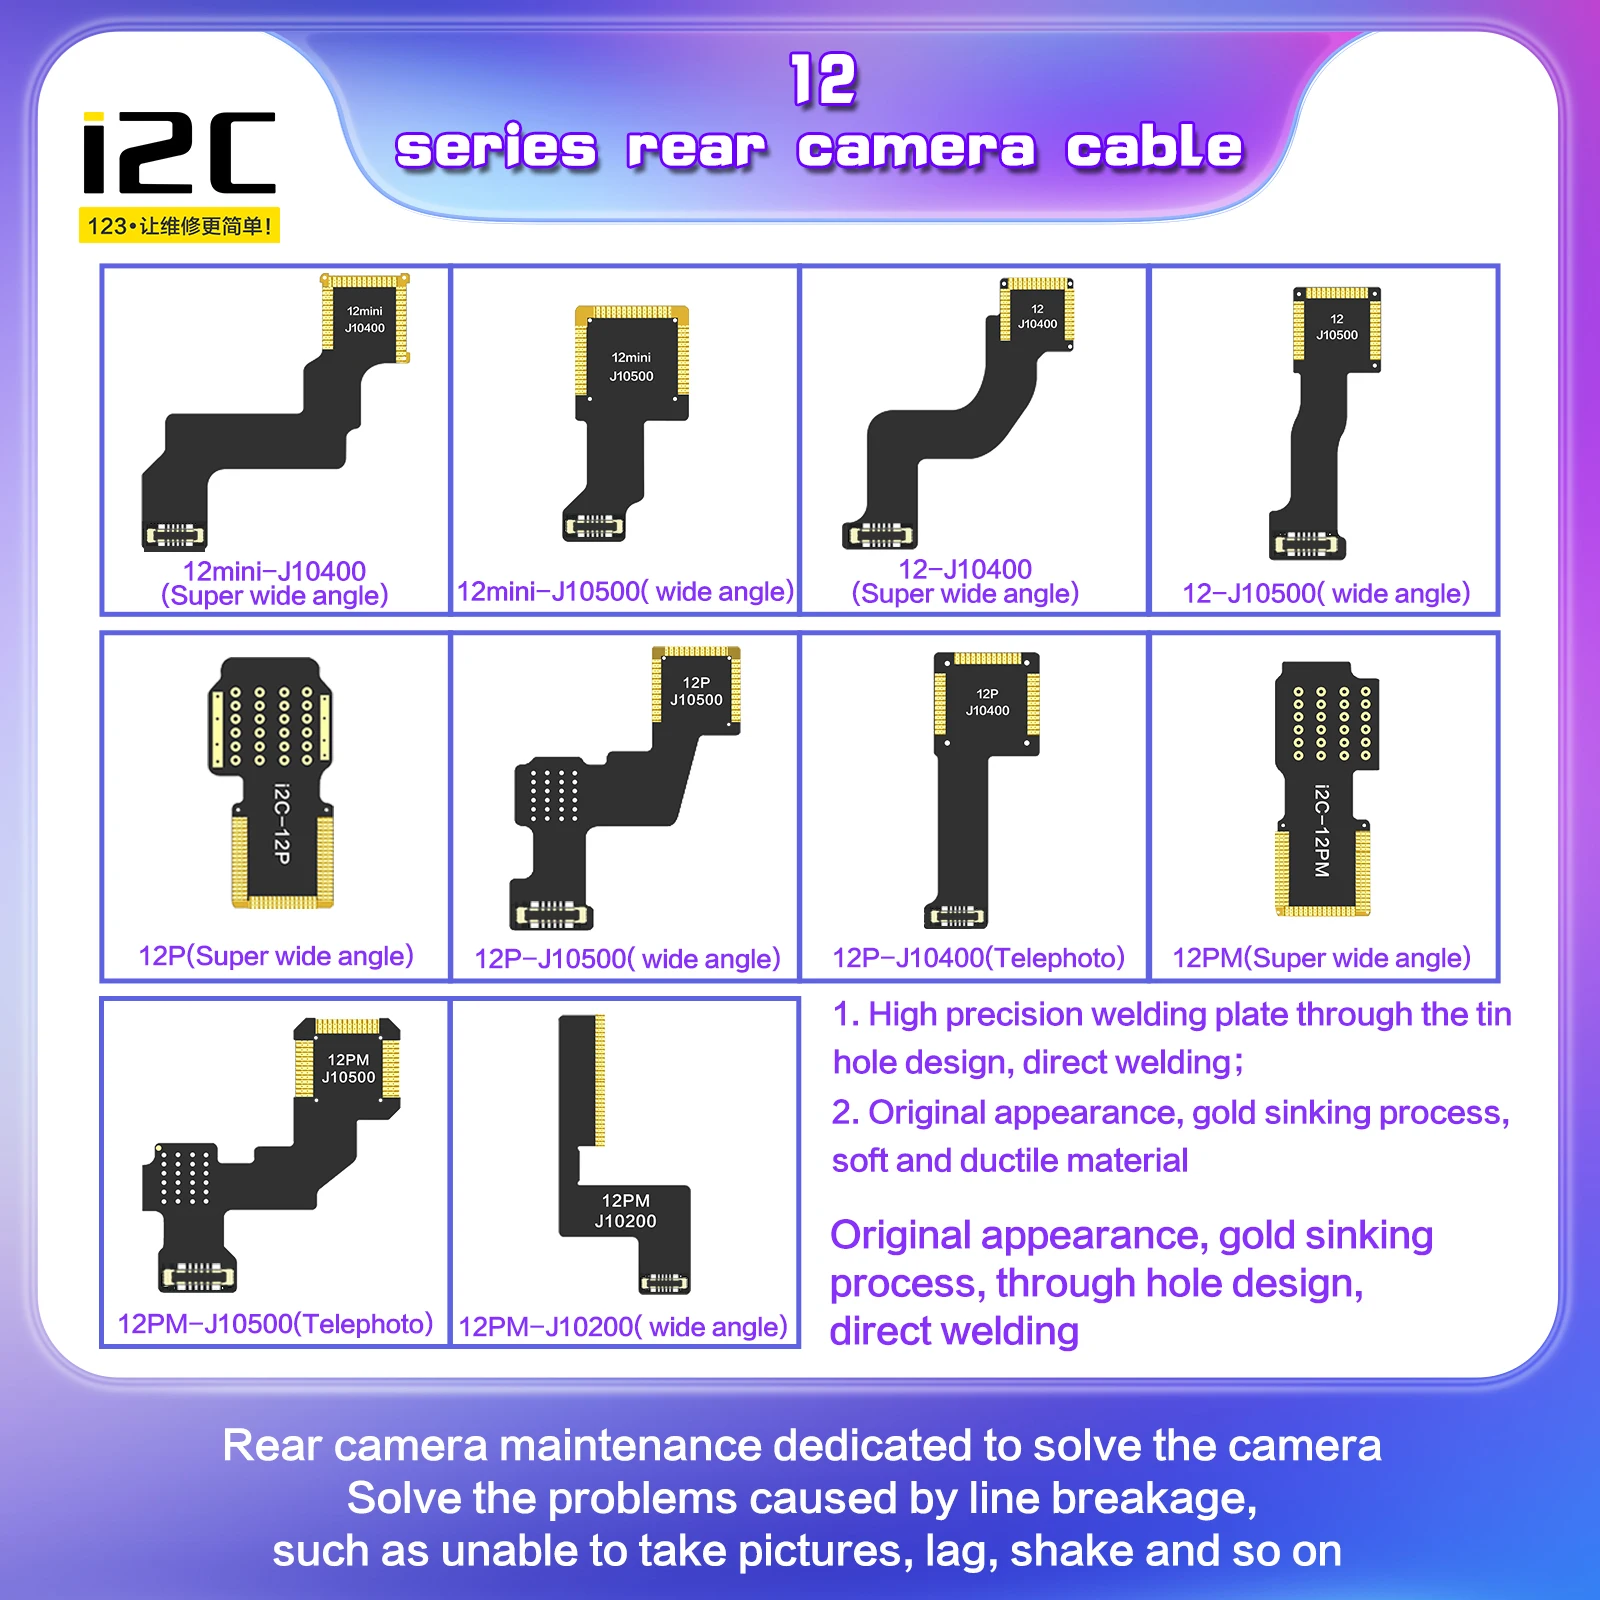 i2c-empty-rear-camera-flex-cable-fpc-for-iphone-12-series-super-wide-angle-long-focus-repair-swap-parts-kit